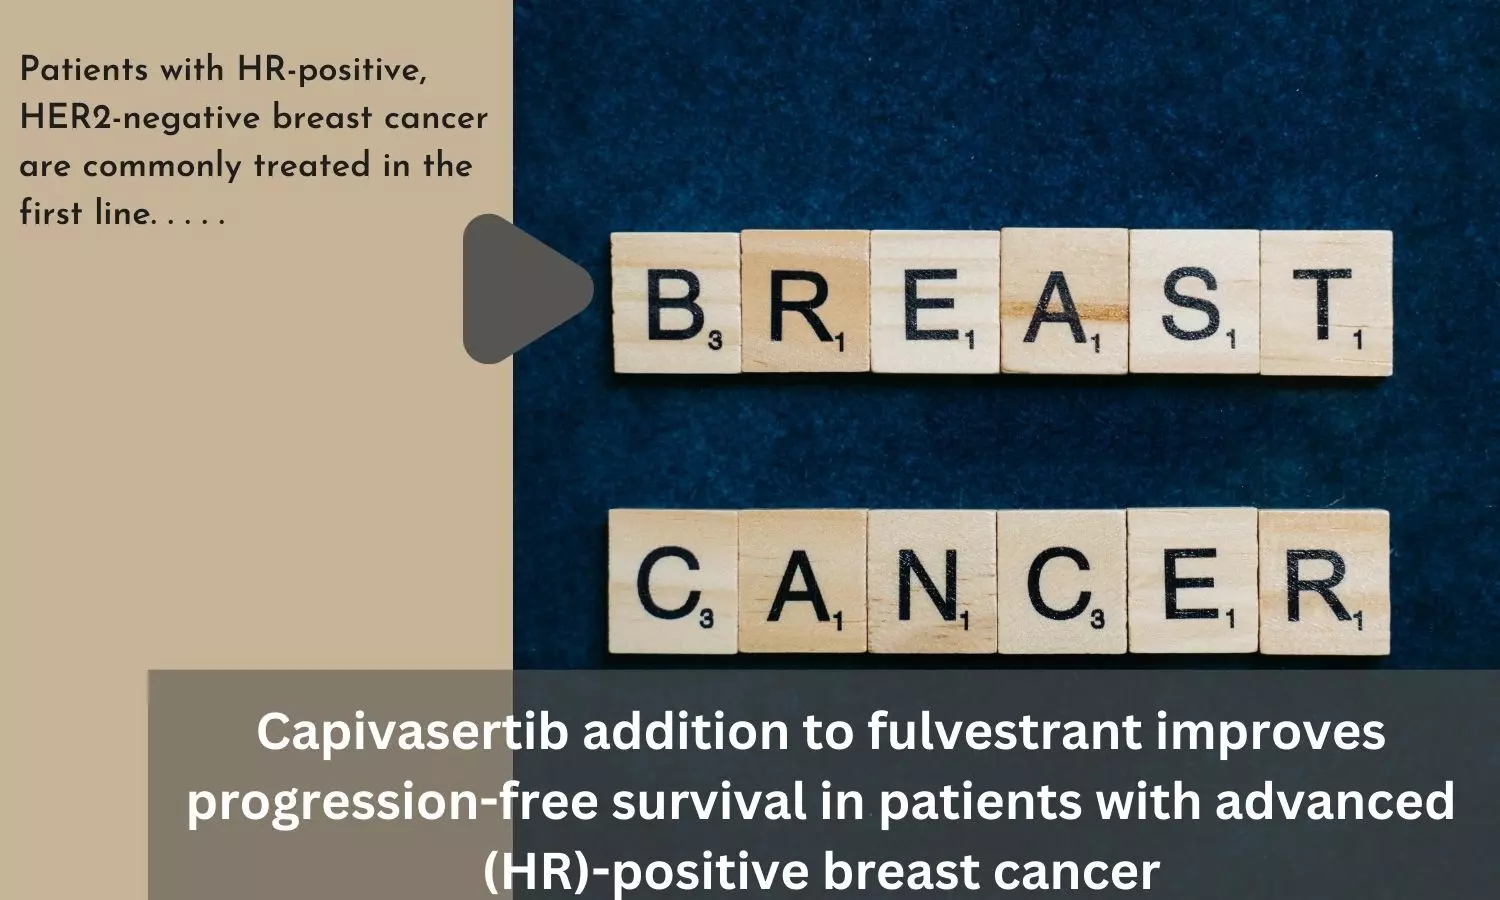 Capivasertib addition to fulvestrant improves progression-free survival in patients with advanced (HR)-positive breast cancer